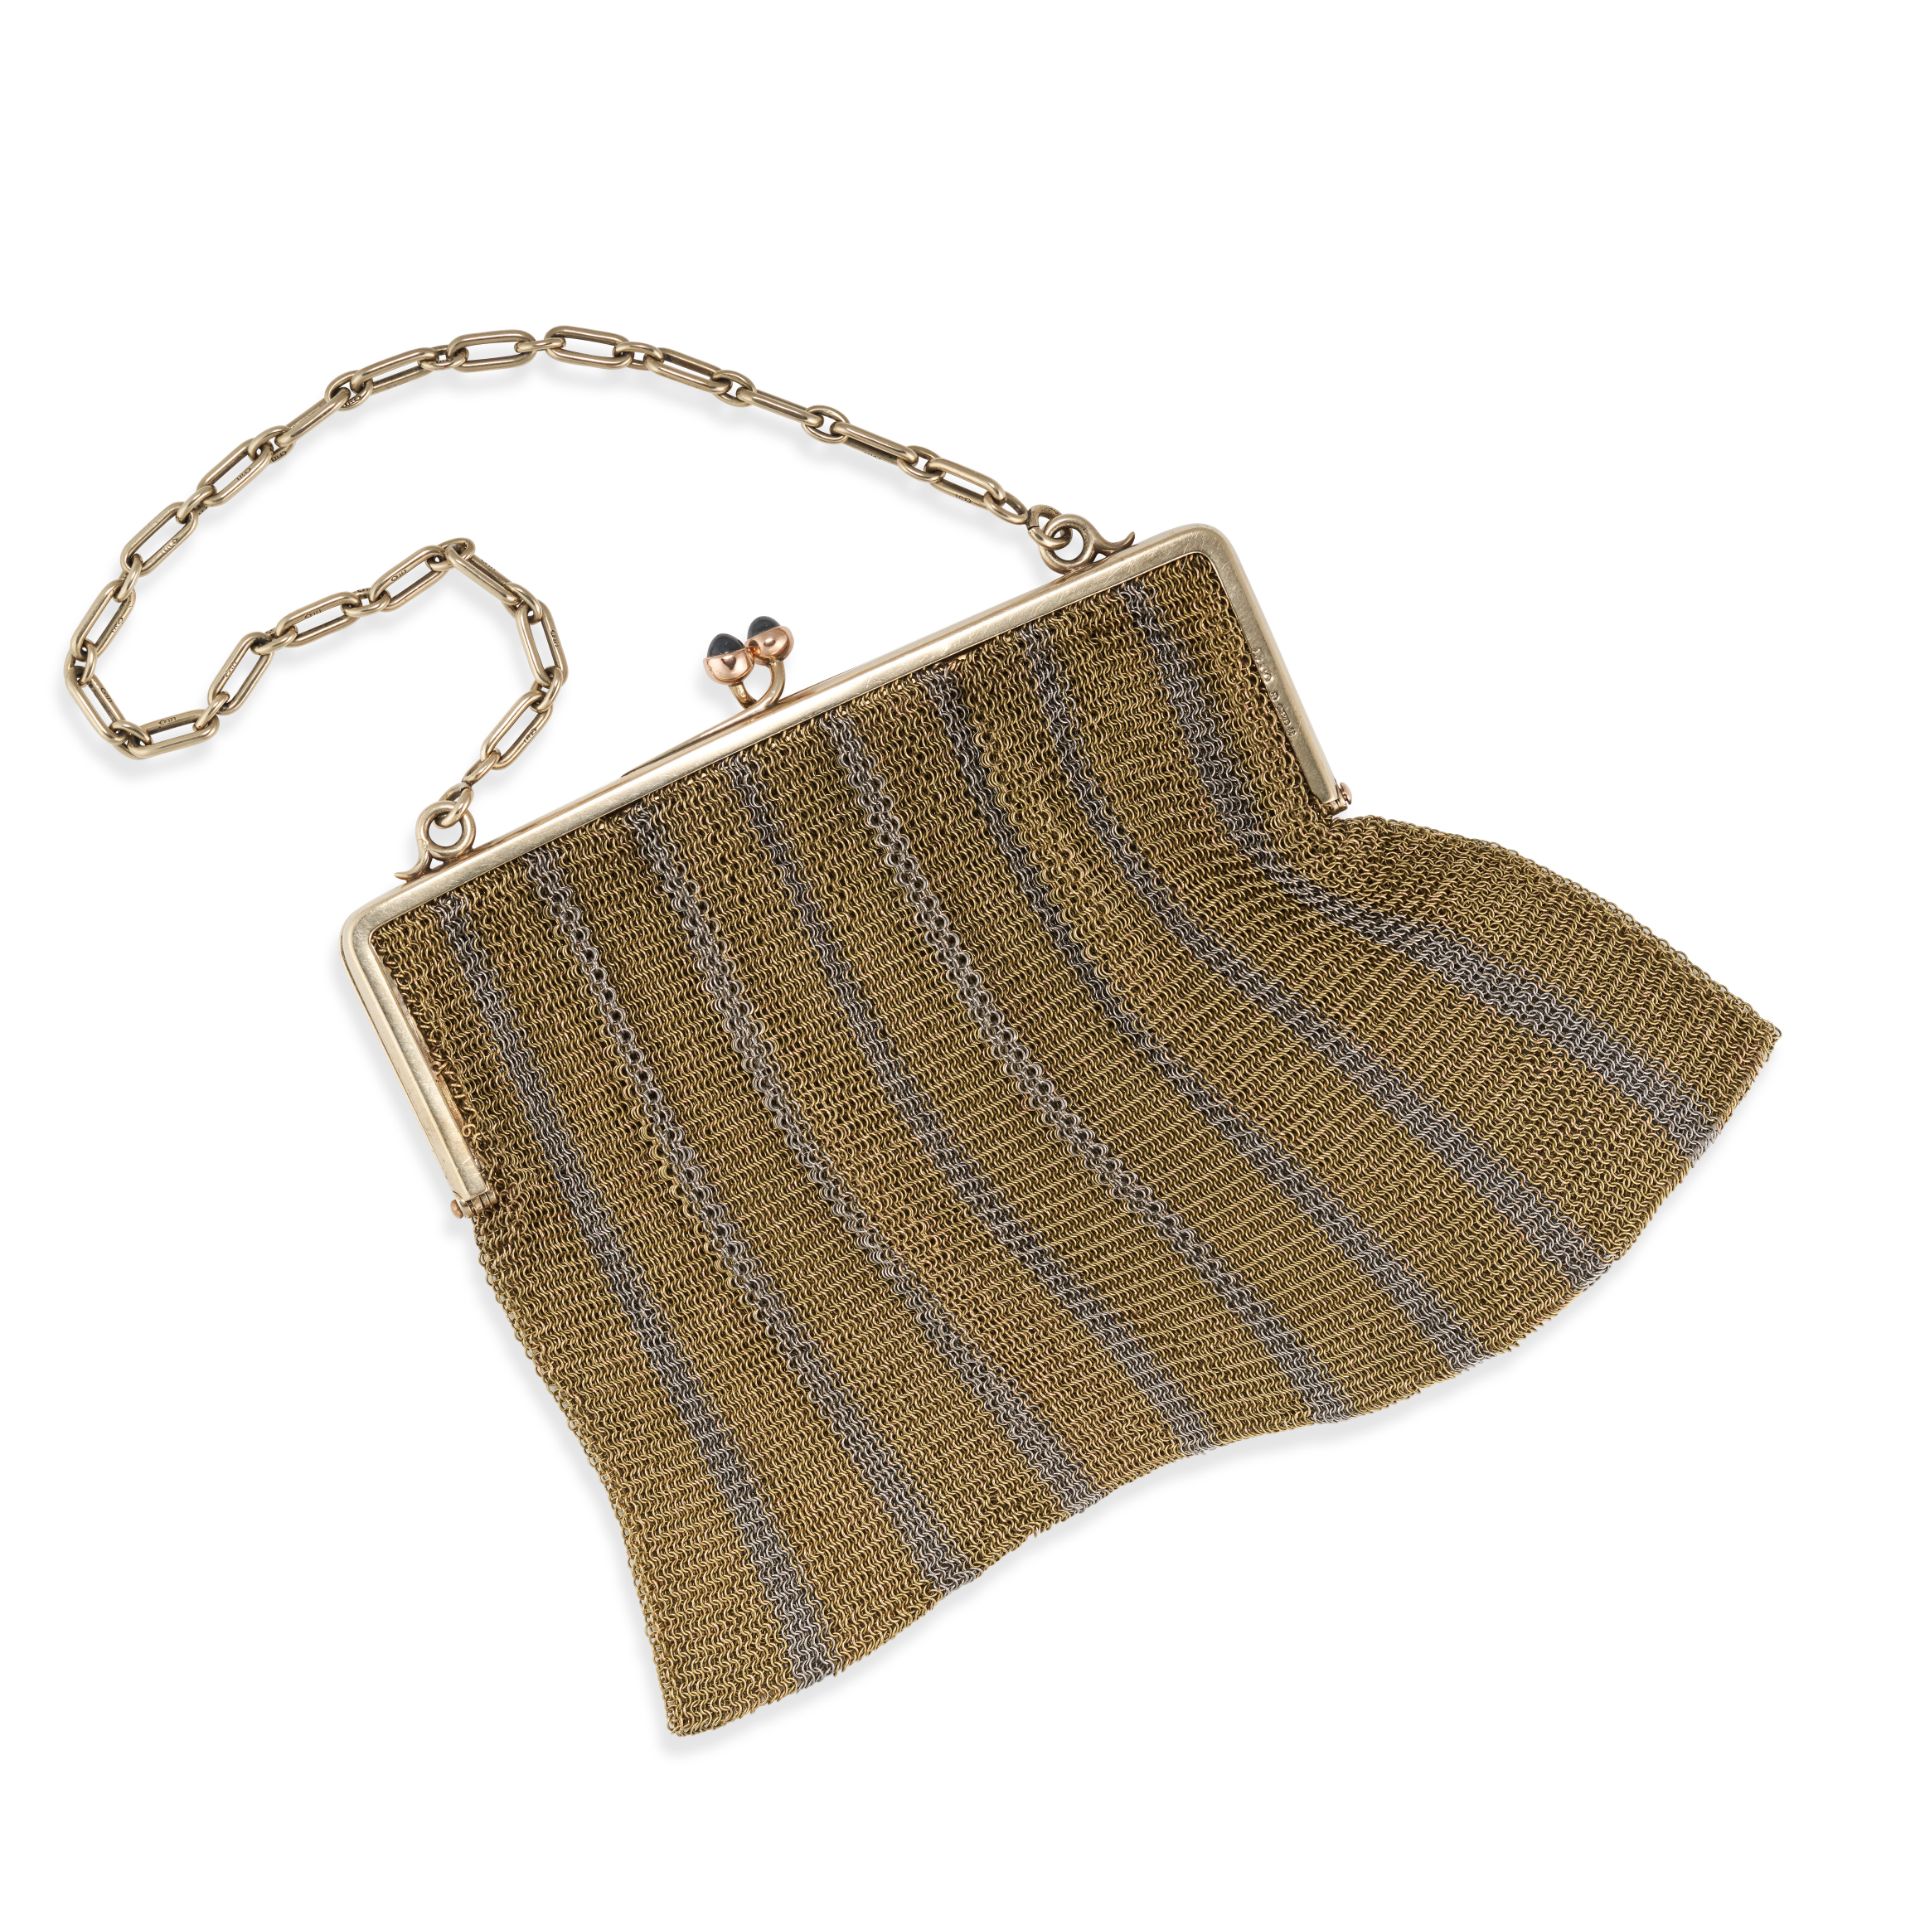 ASPREY, A GOLD MESH PURSE in 9ct yellow gold, the purse made from a fine woven gold mesh, the cla...